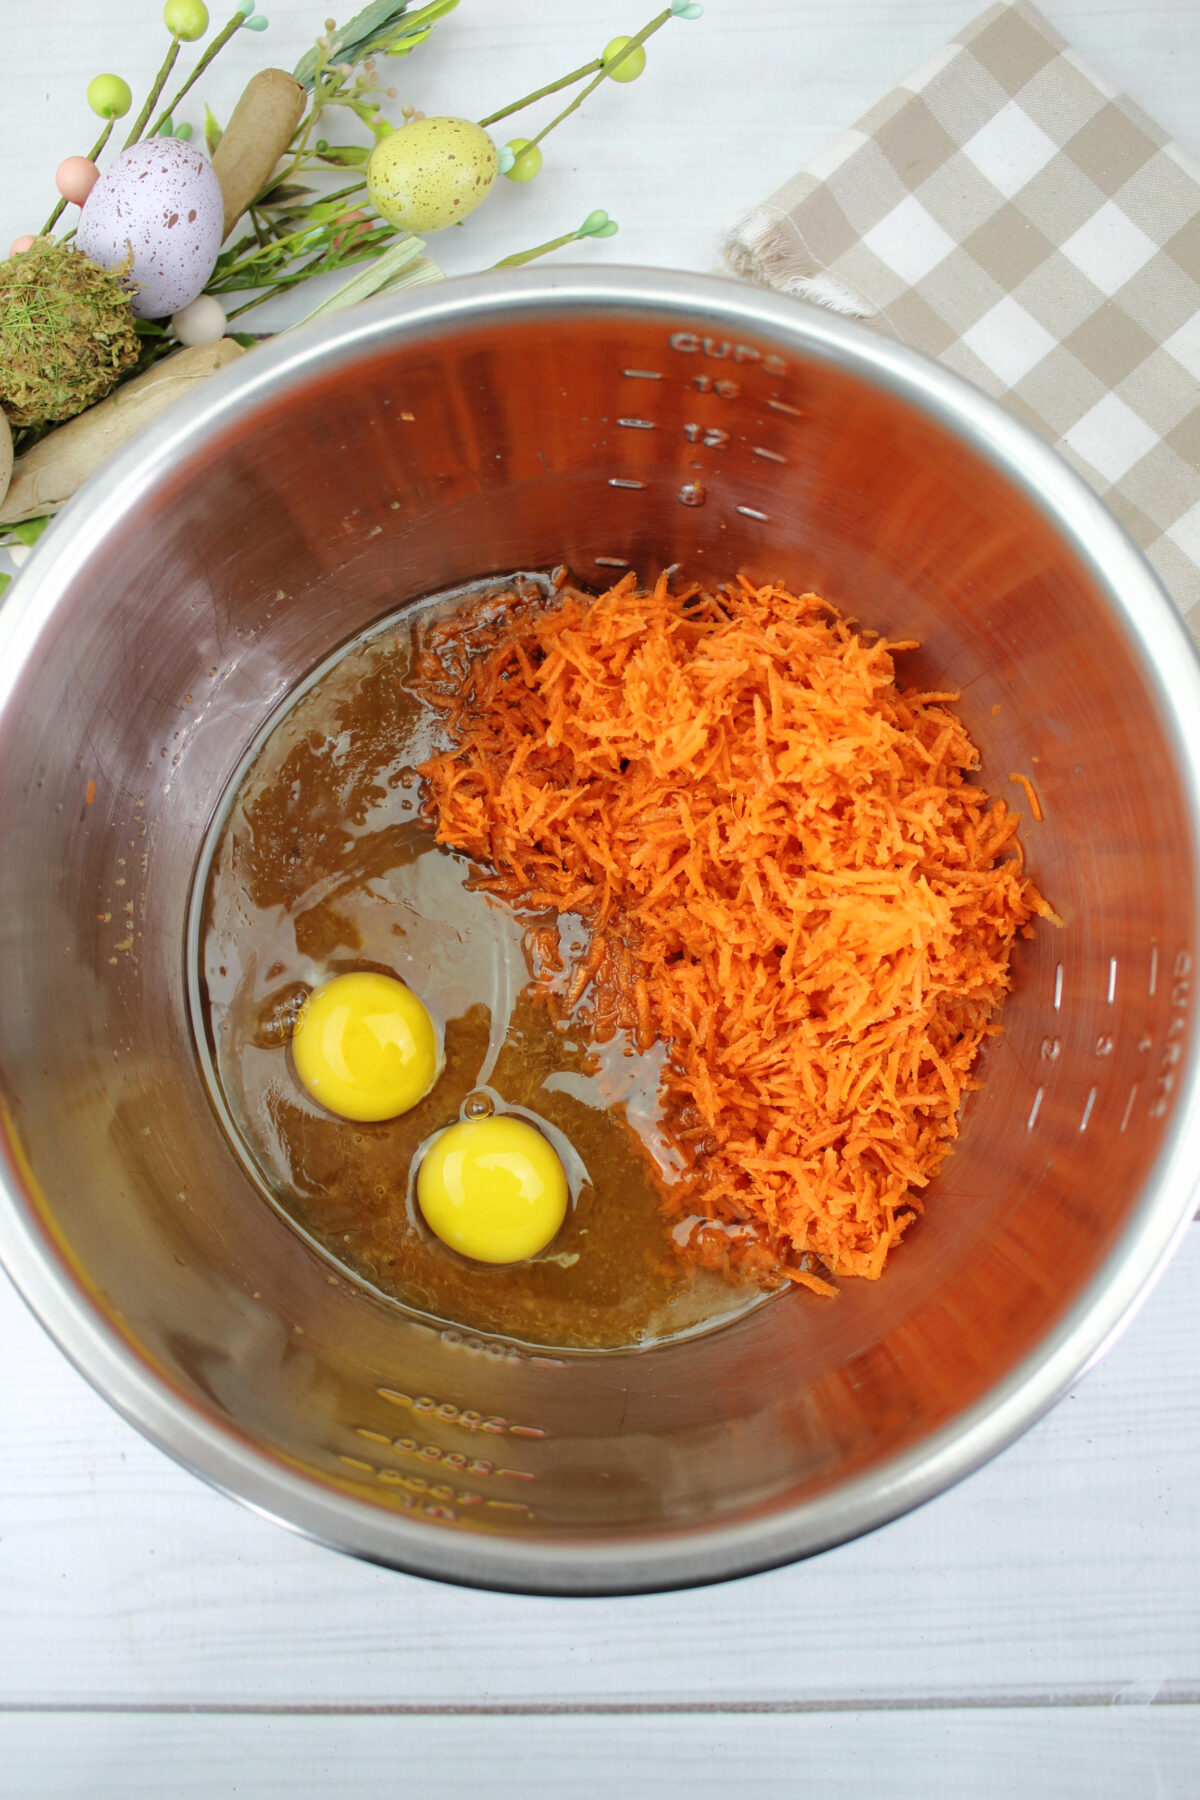 Shredded carrots and eggs on top of sugar-butter mix.